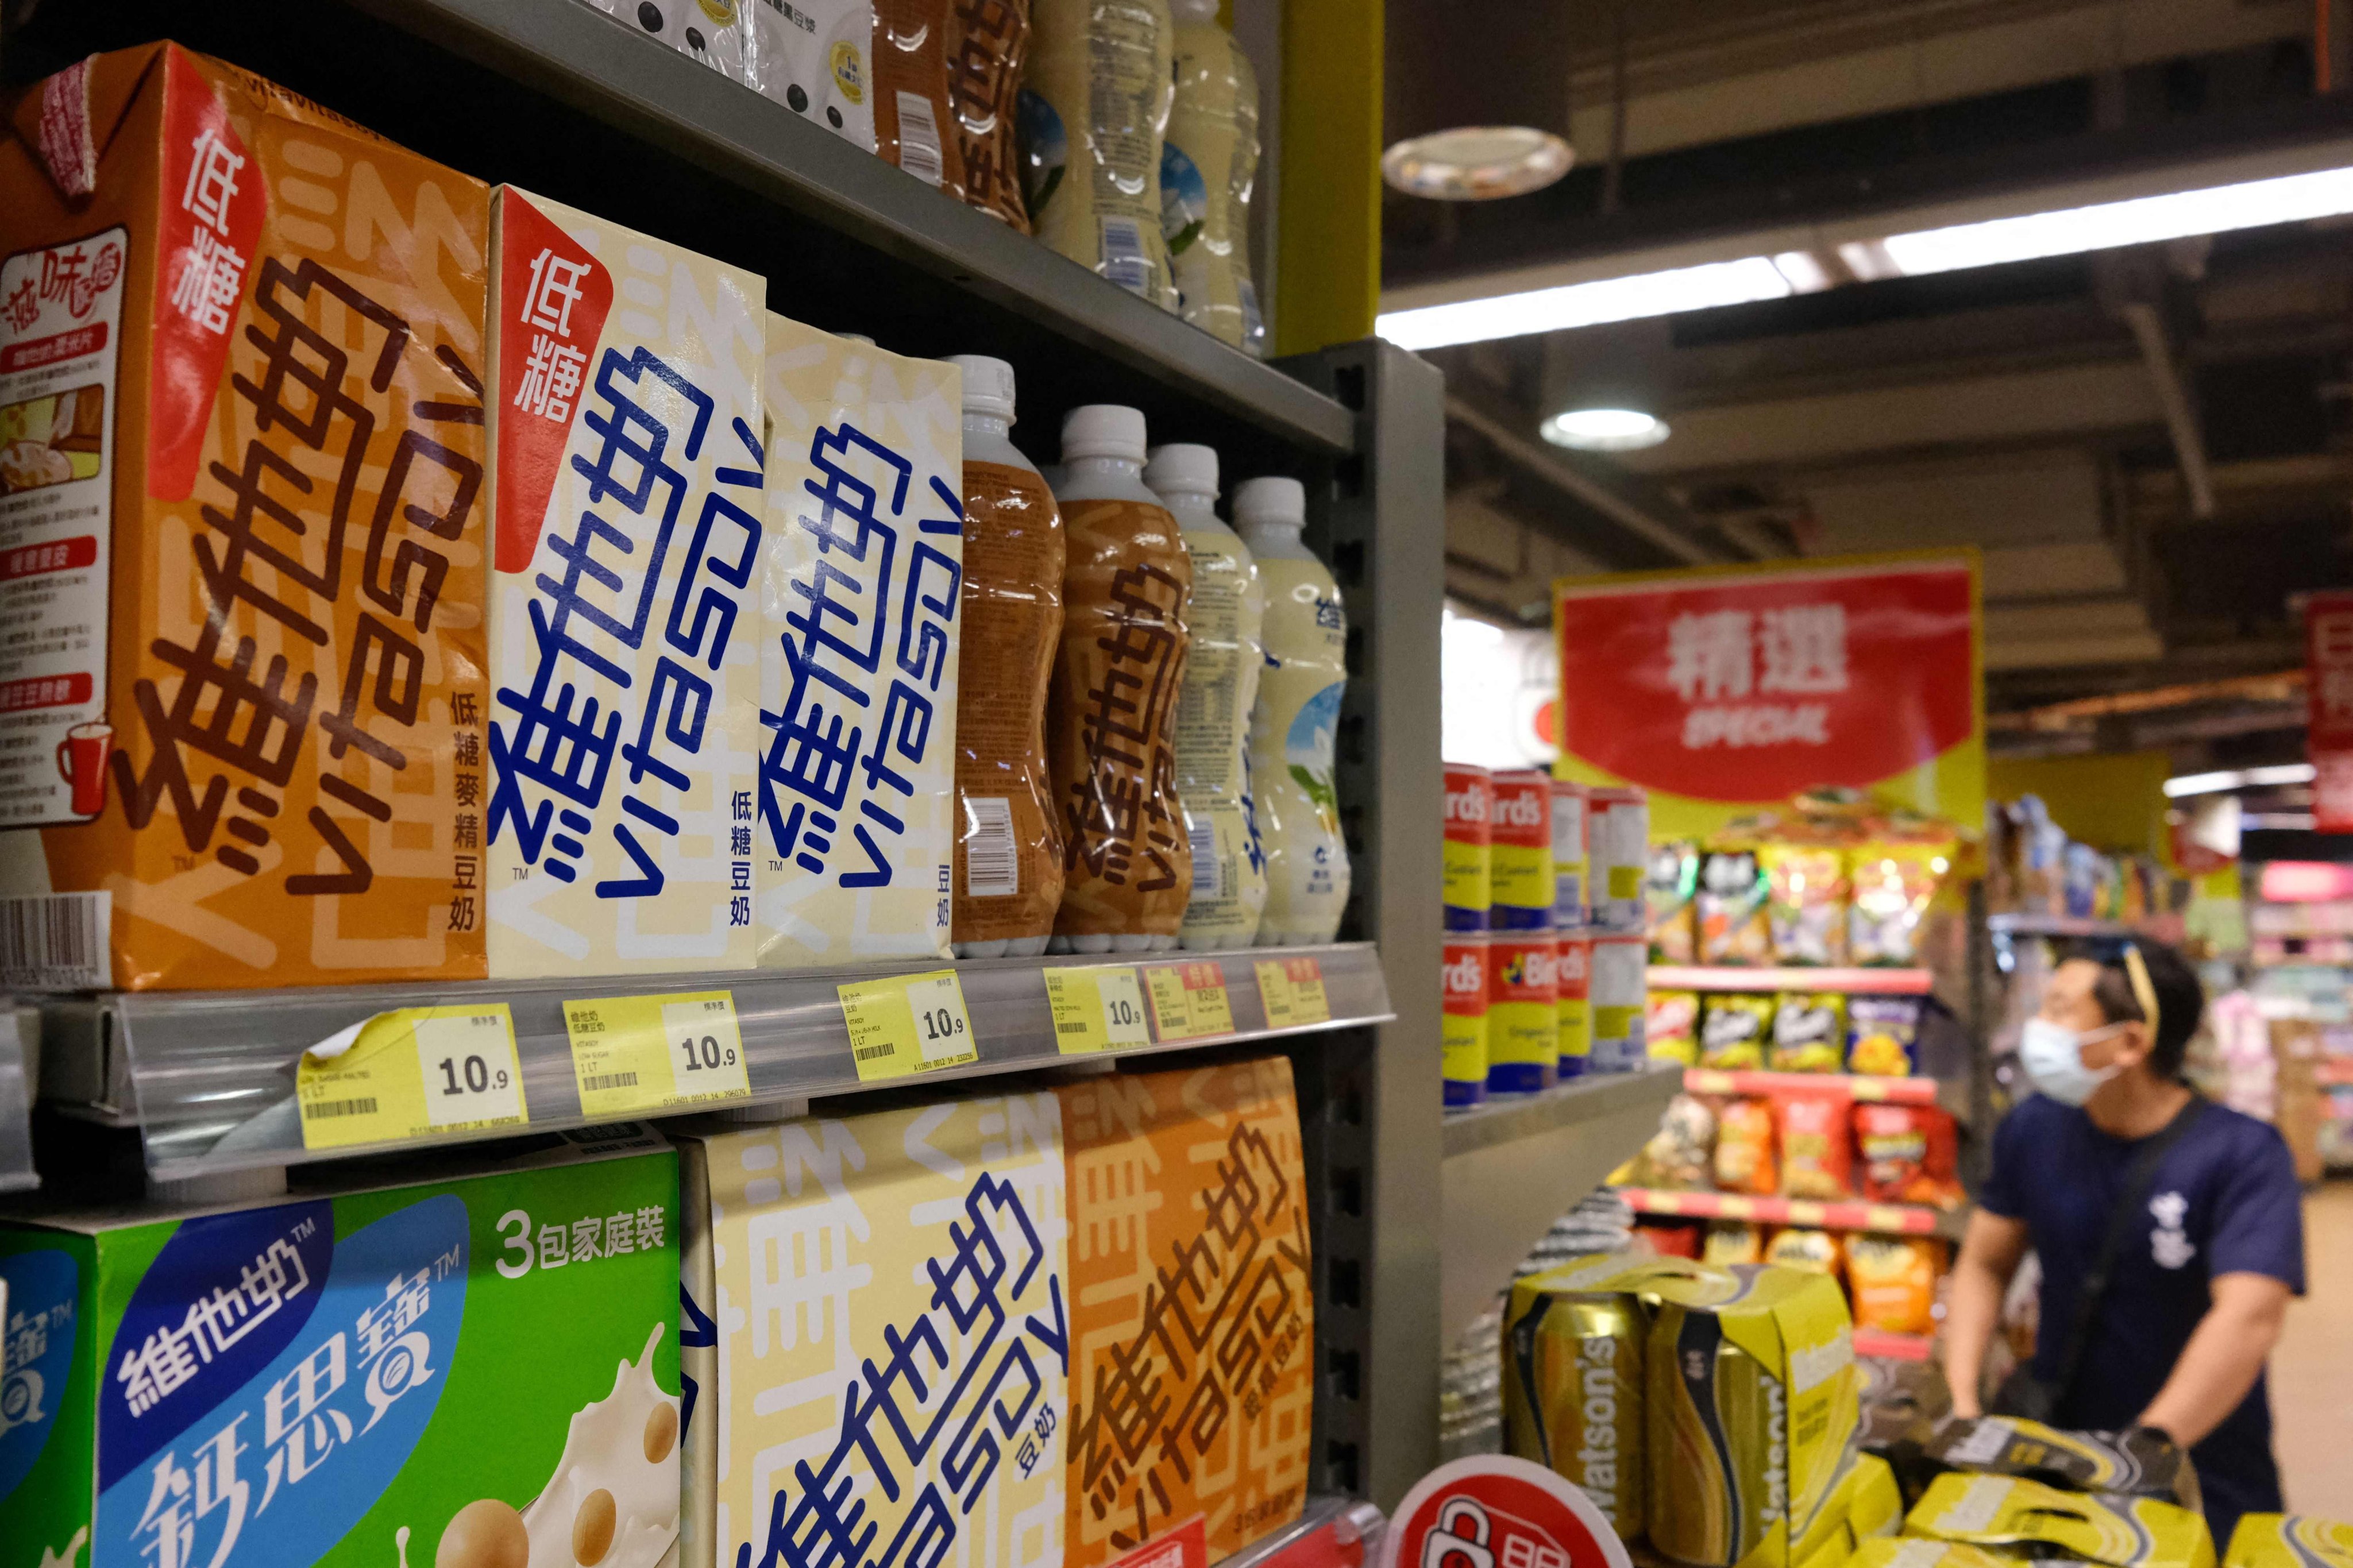 Vitasoy products are displayed on a supermarket shelf in Hong Kong on July 5, 2021. Photo: AFP